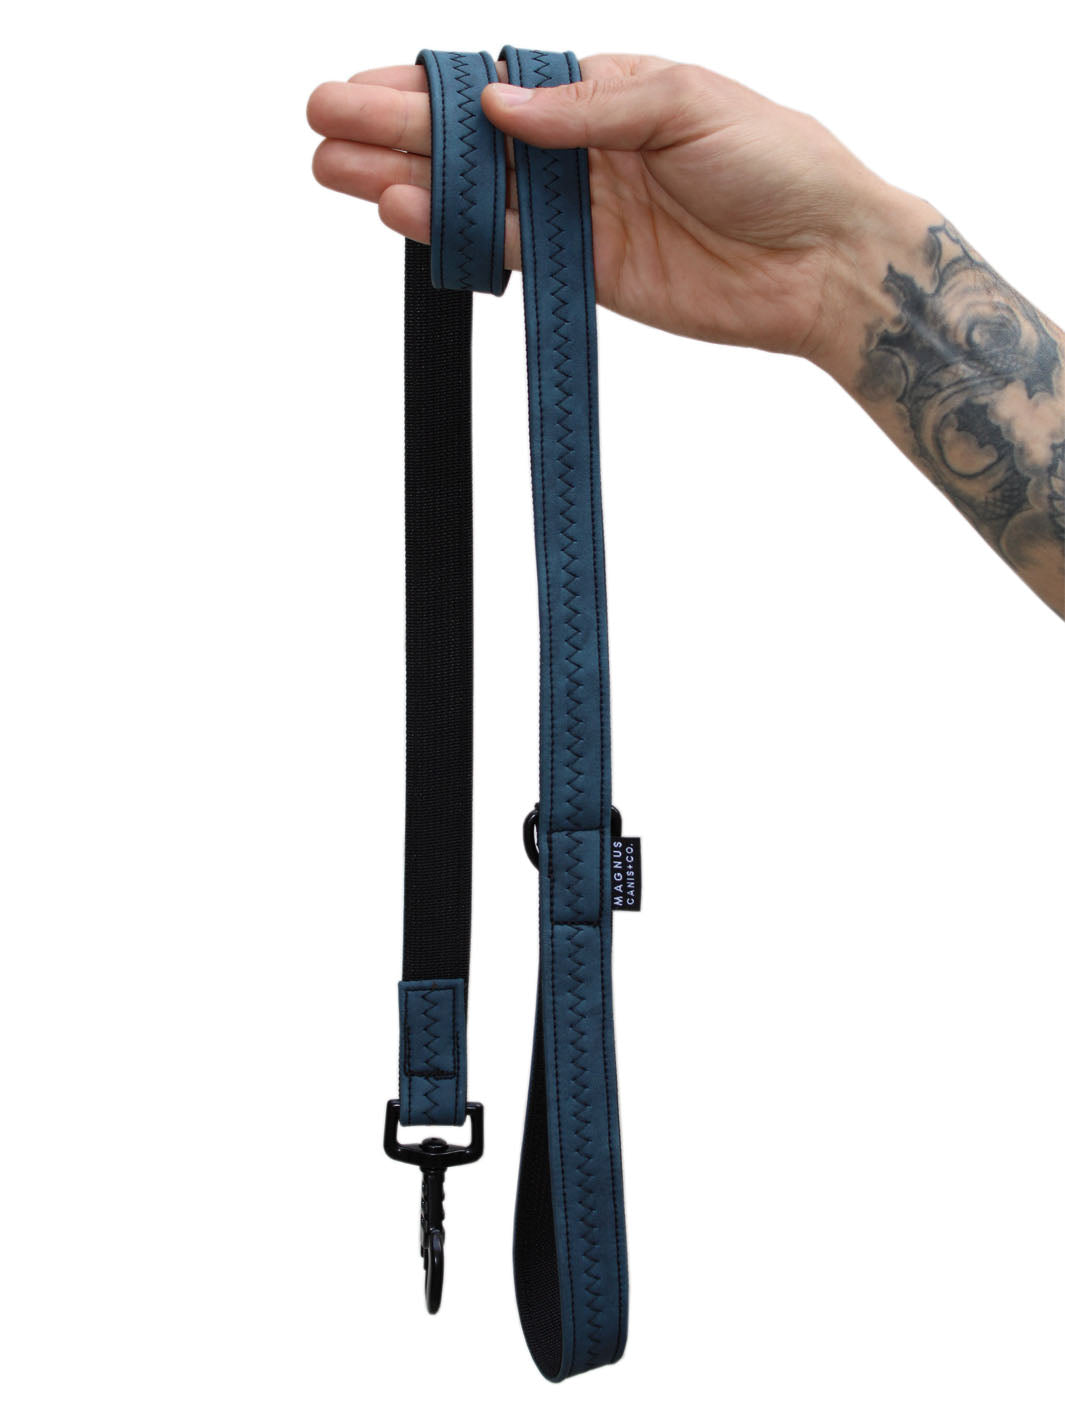 Dark blue dog leash made of vegan leather by MAGNUS Canis.